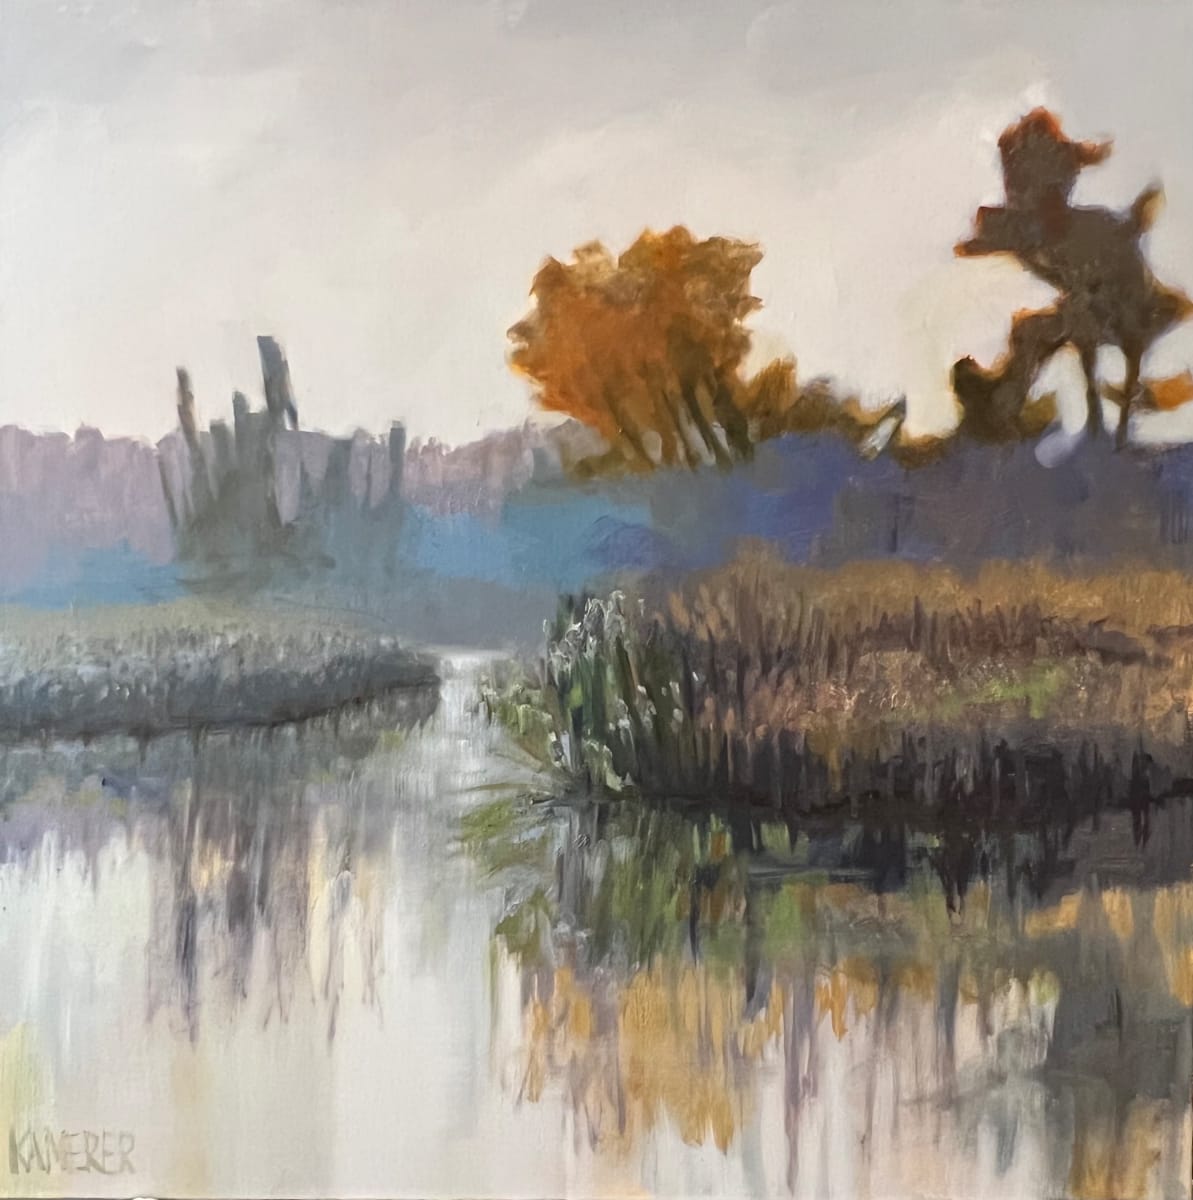 Wind Your Way by Mary Kamerer Impressionist Painting  Image: Soft, cool light of early morning picks up the tonal colors of the marsh.  Wind your way between the high grasses and just  listen . 